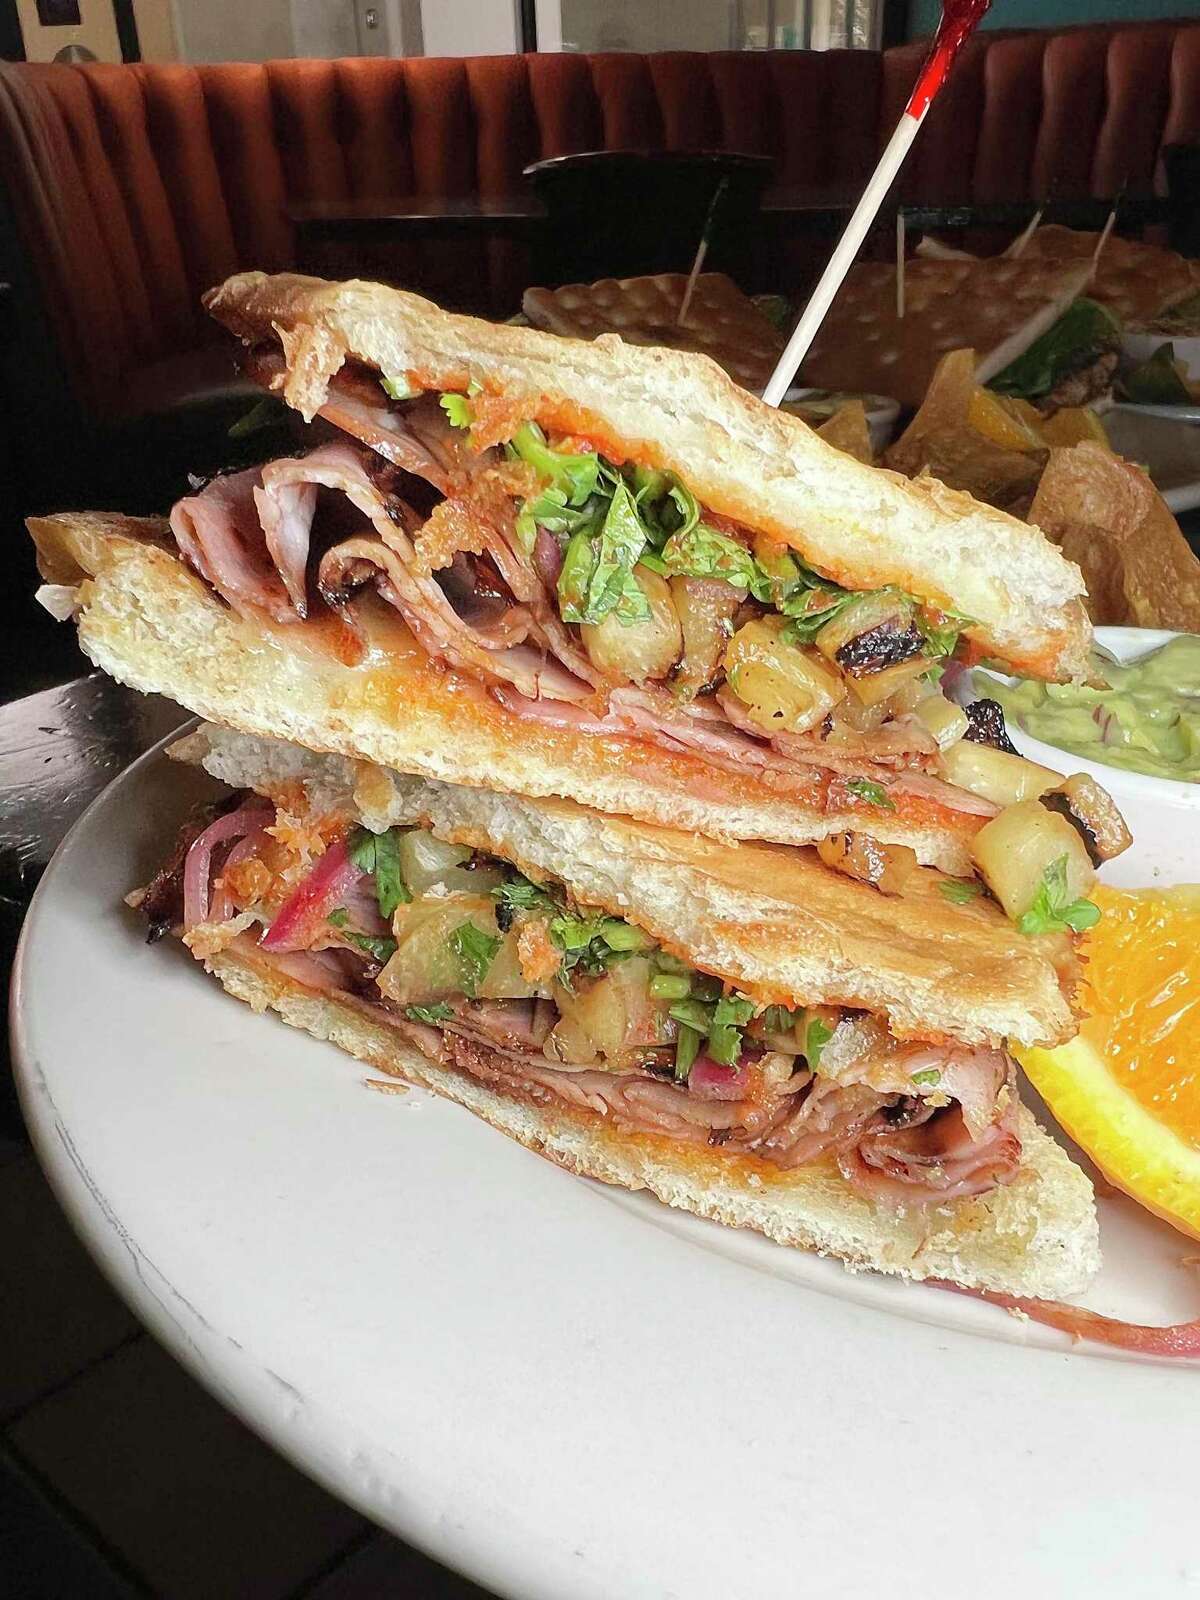 The Spicy Hawaiian sandwich includes grilled ham, pineapple, provolone cheese, cilantro and Sriracha on a bolillo roll at Pam’s Patio Kitchen and Wine Bar.